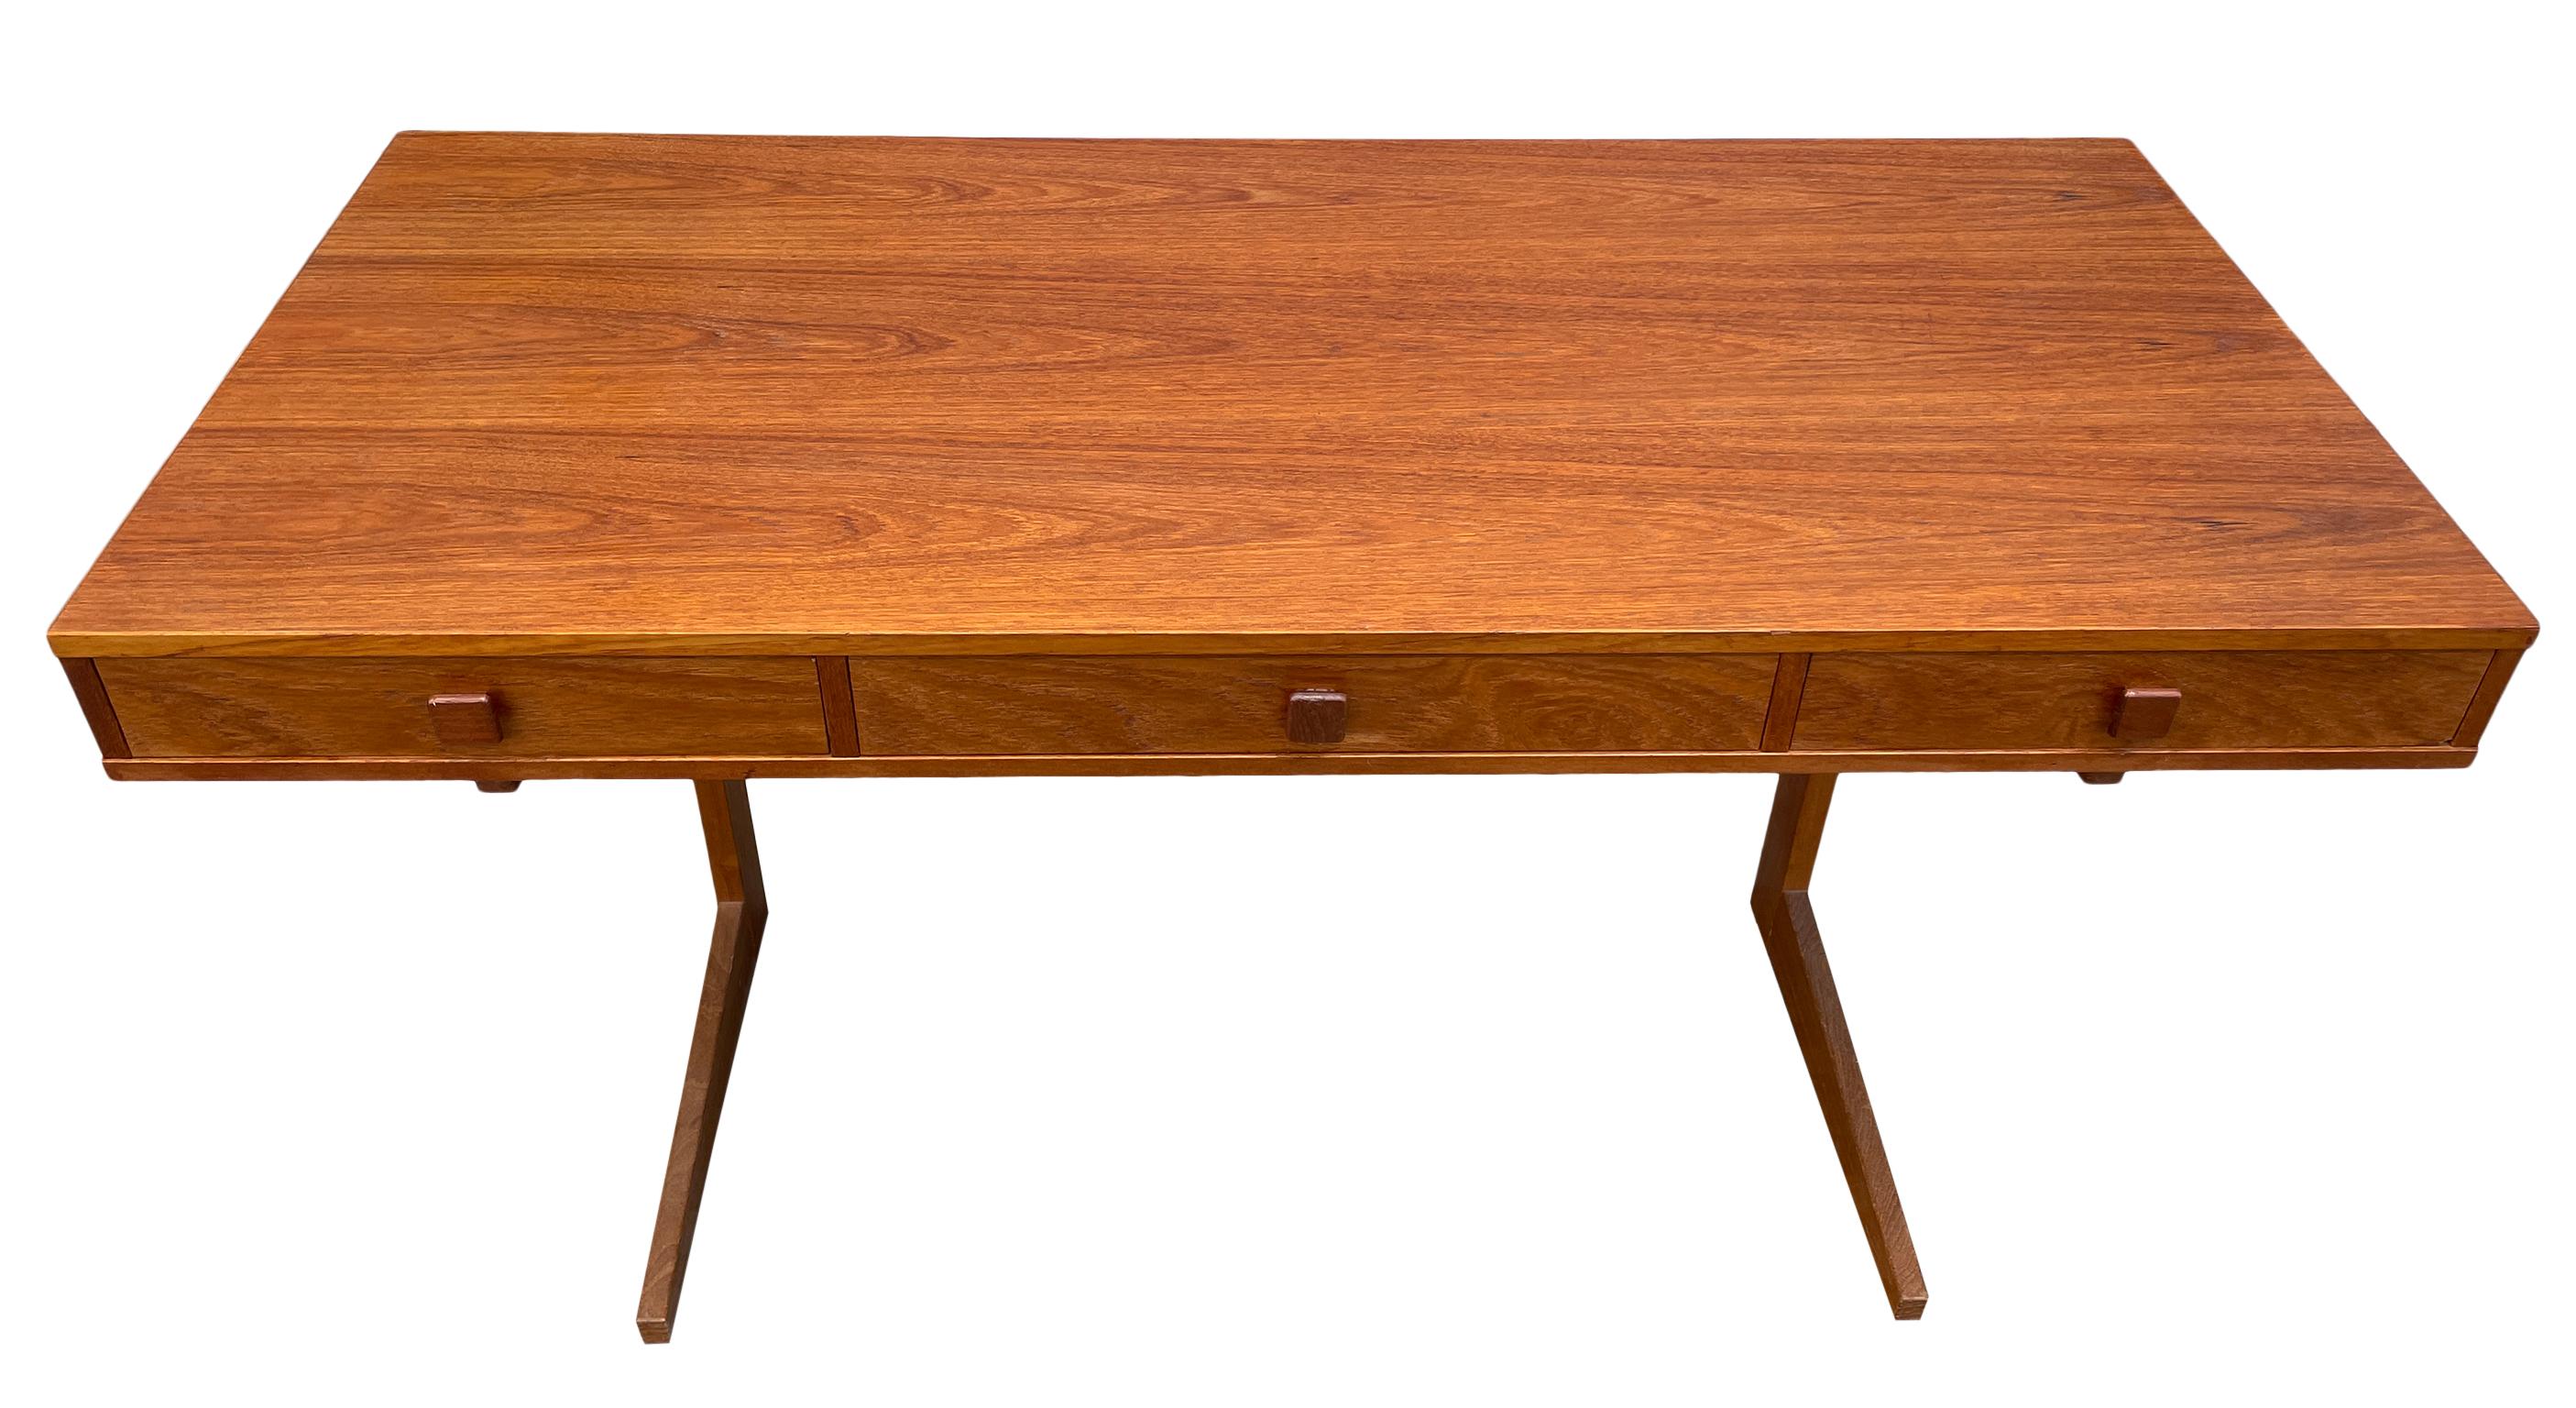 Gorgeous Teak minimalist desk featuring on a floating rectangular form with three drawers and a solid teak trestle base. The drawers easily slide and are very clean. Fantastic original vintage condition and ready for use. Danish mid century design.